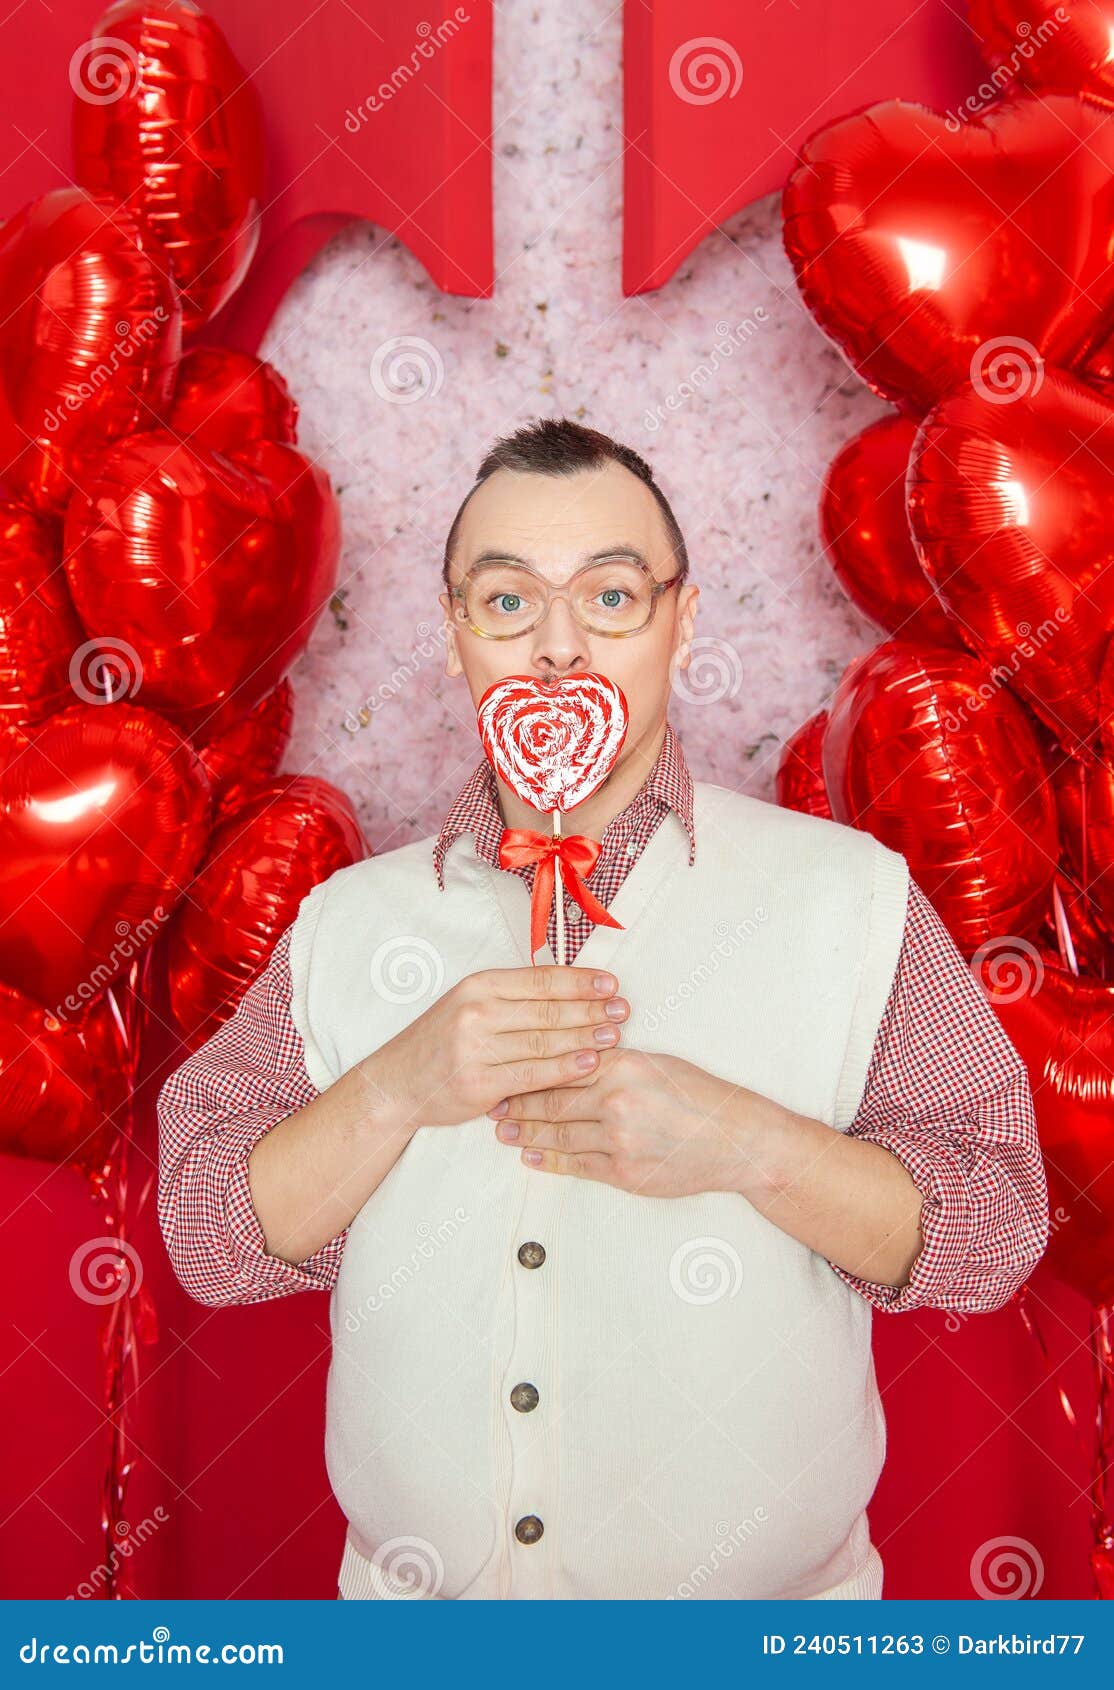 Funny Bearded Retro Style Man Holding Red Heart Shape Lollipop For Valentine Day Stock Image